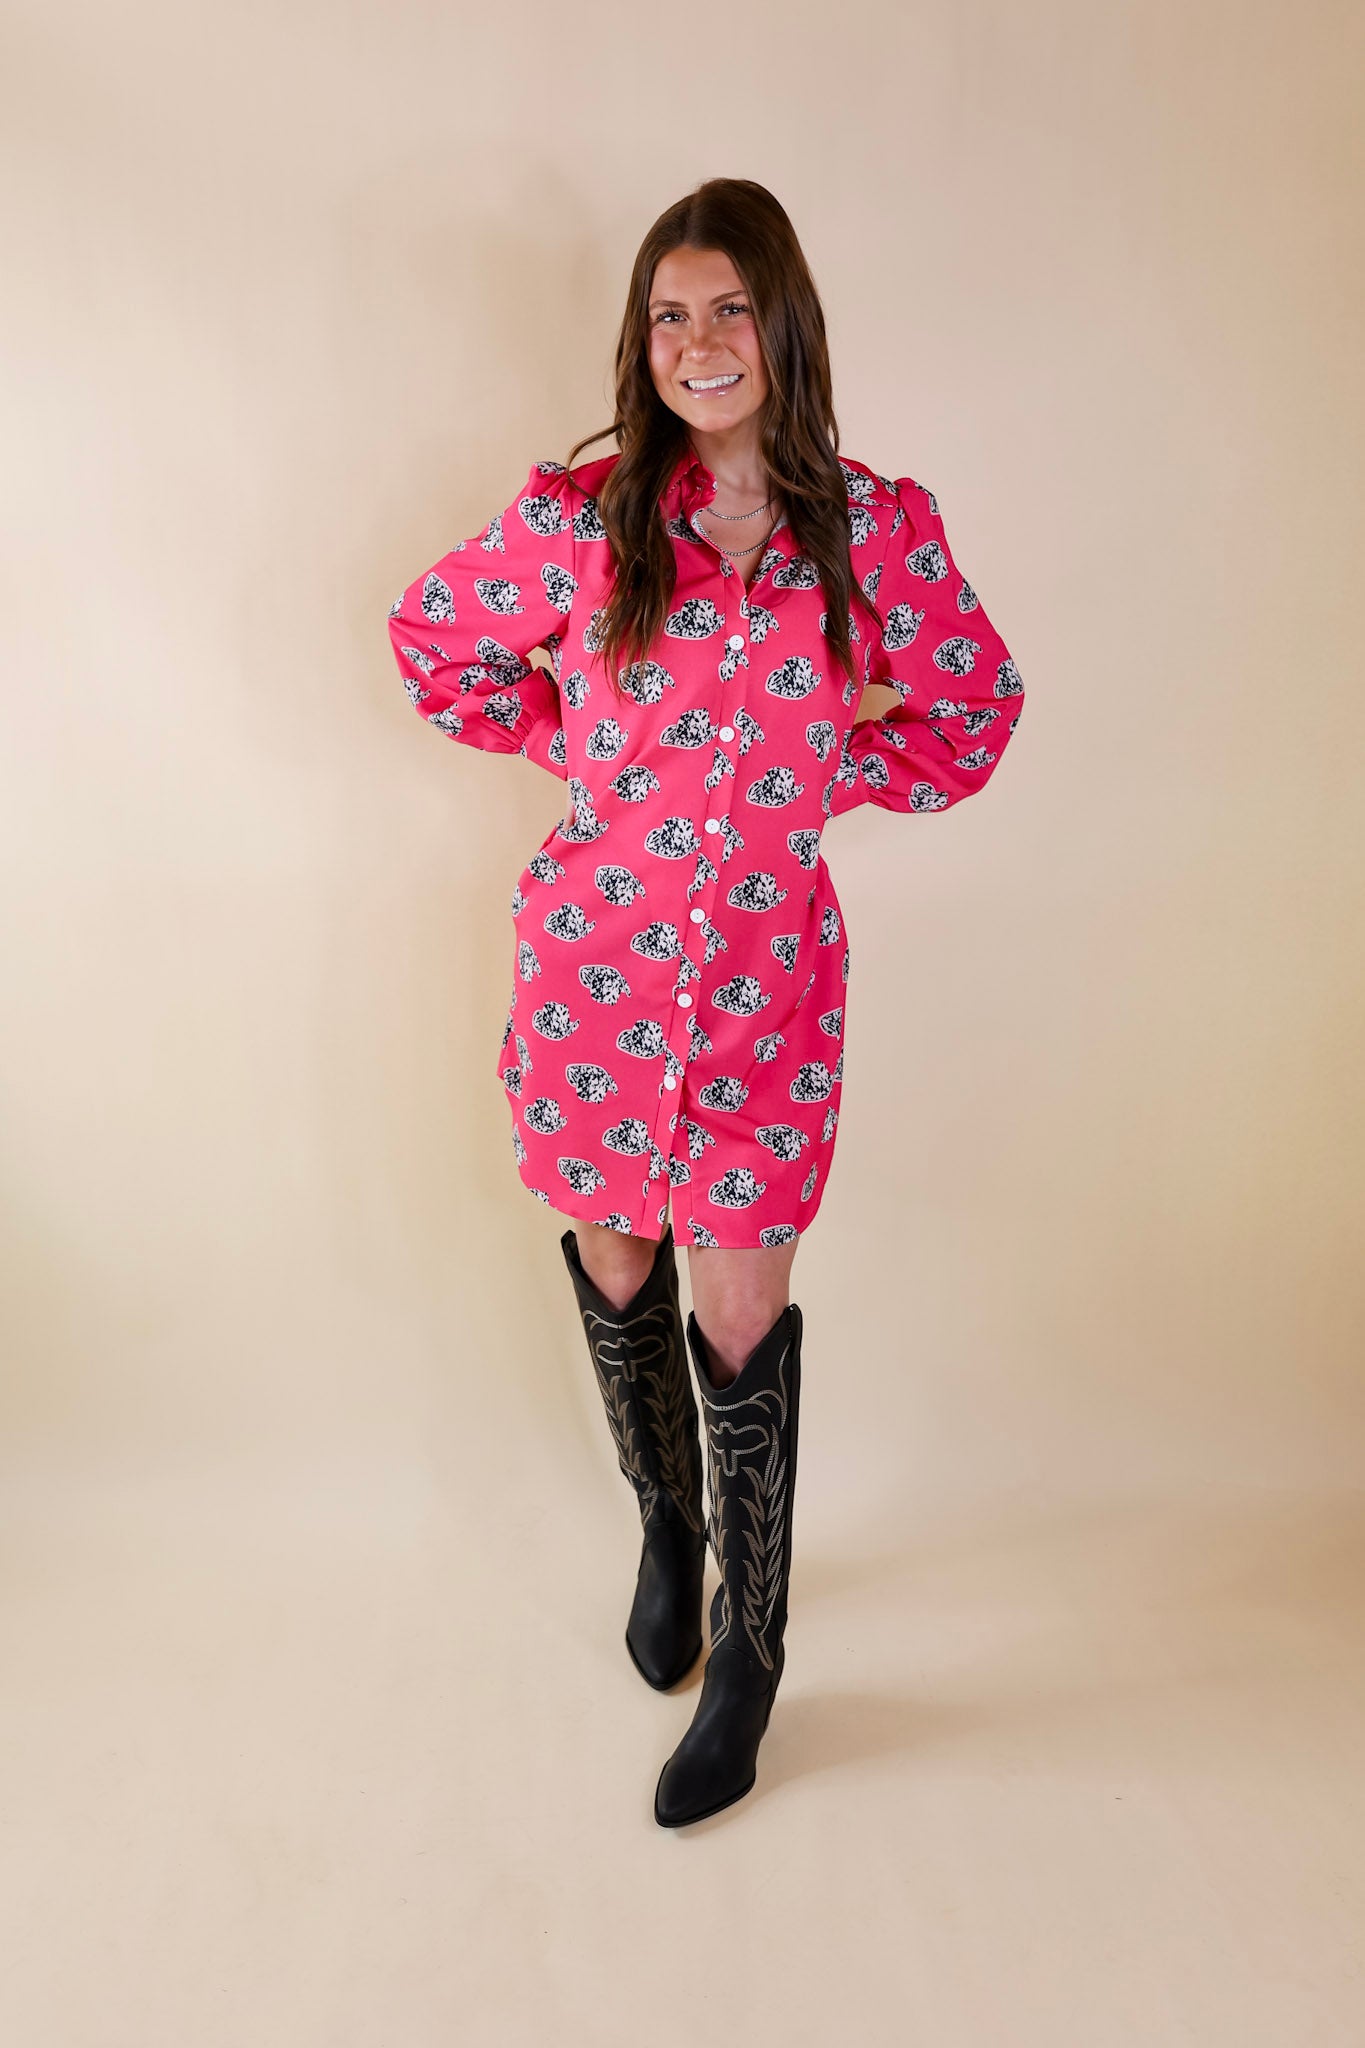 The Cowgirl Way Button Up Cow Print Cowboy Hat Dress in Hot Pink - Giddy Up Glamour Boutique